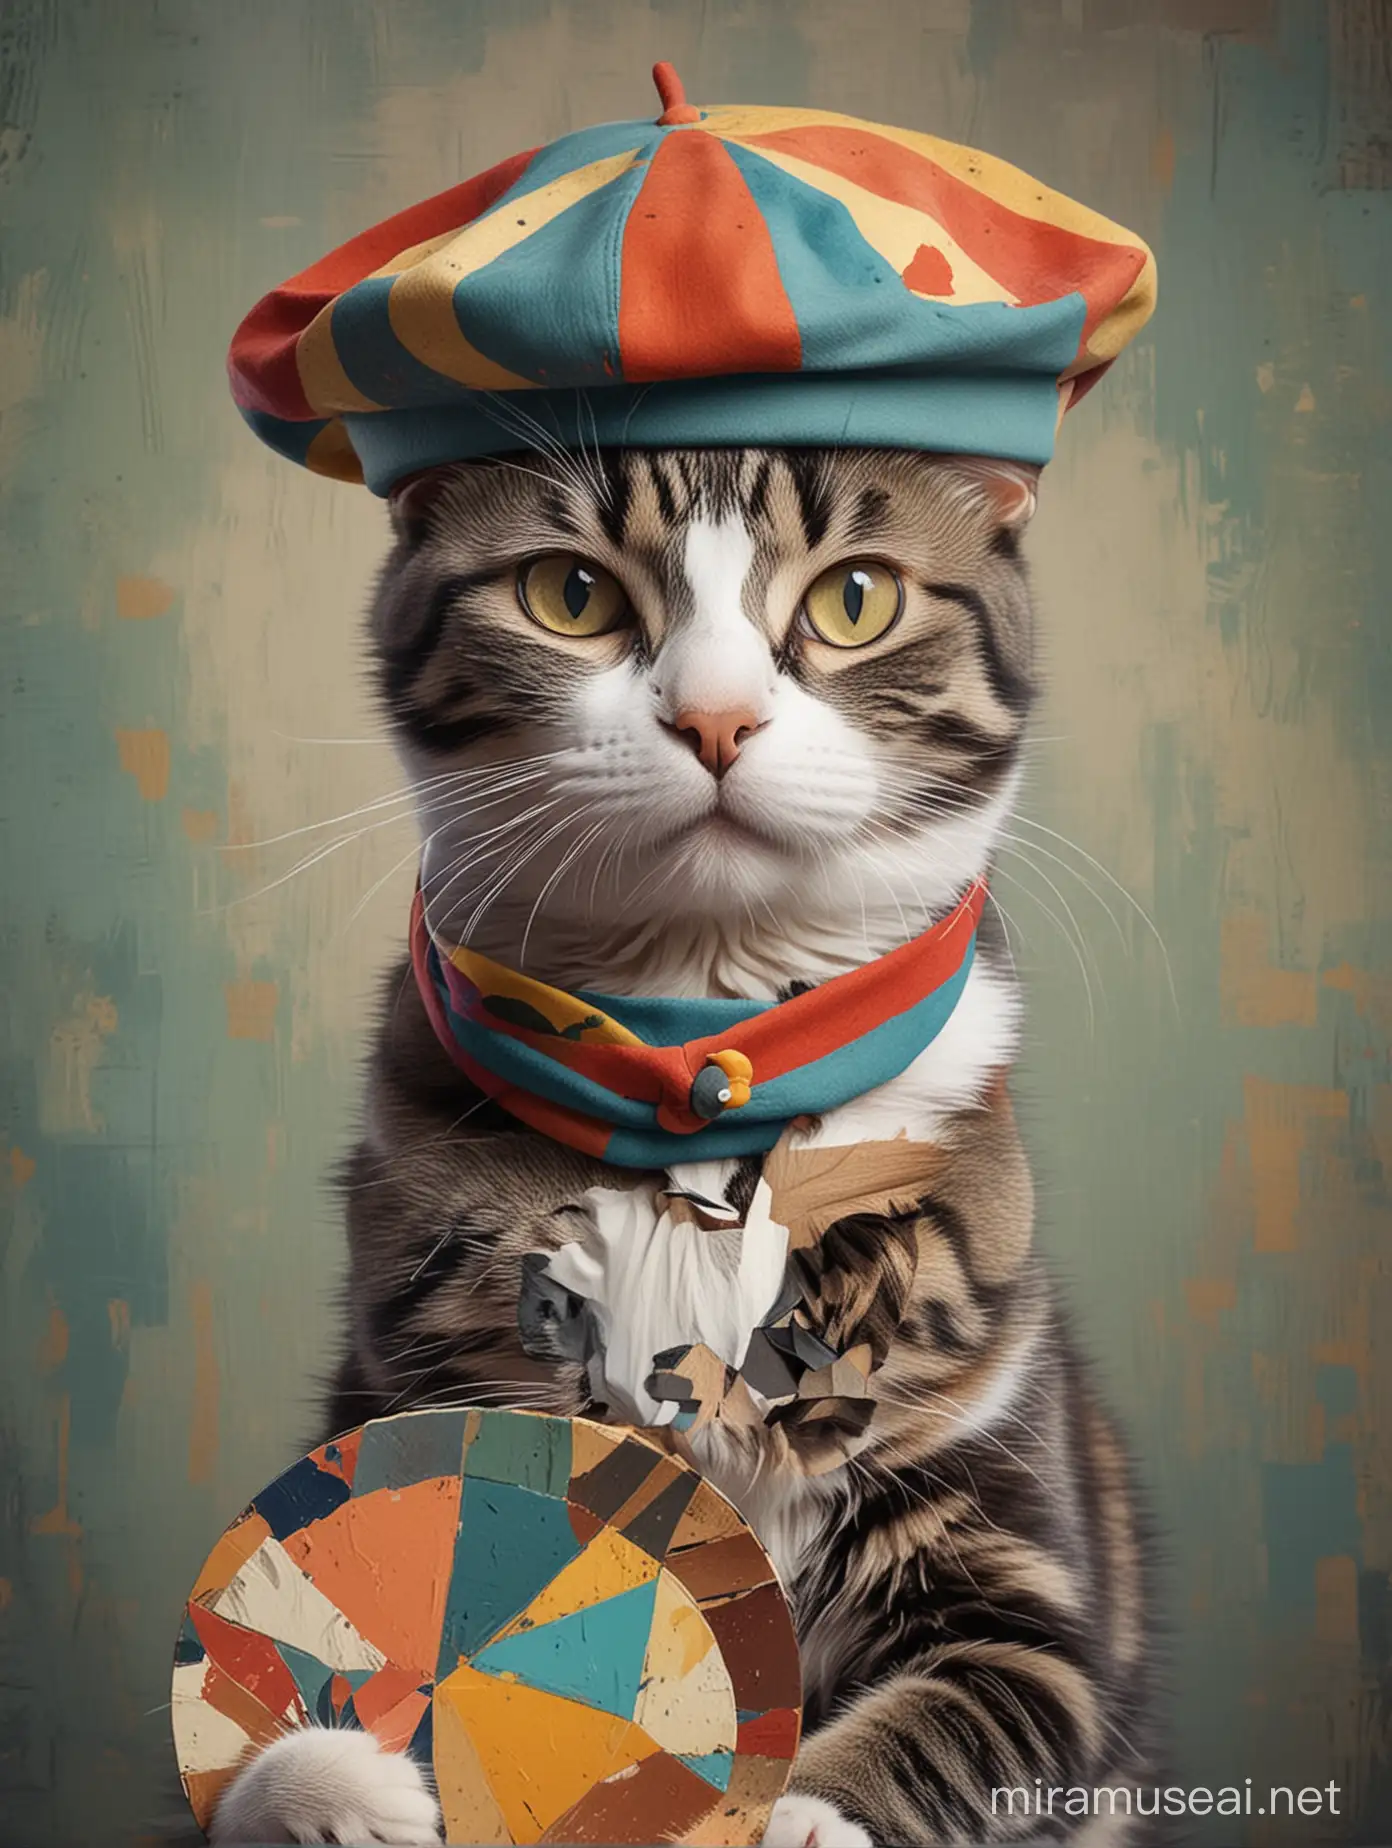 Artistic Cat in Beret Painting Abstract Patterns with Palette Inspired by Picasso